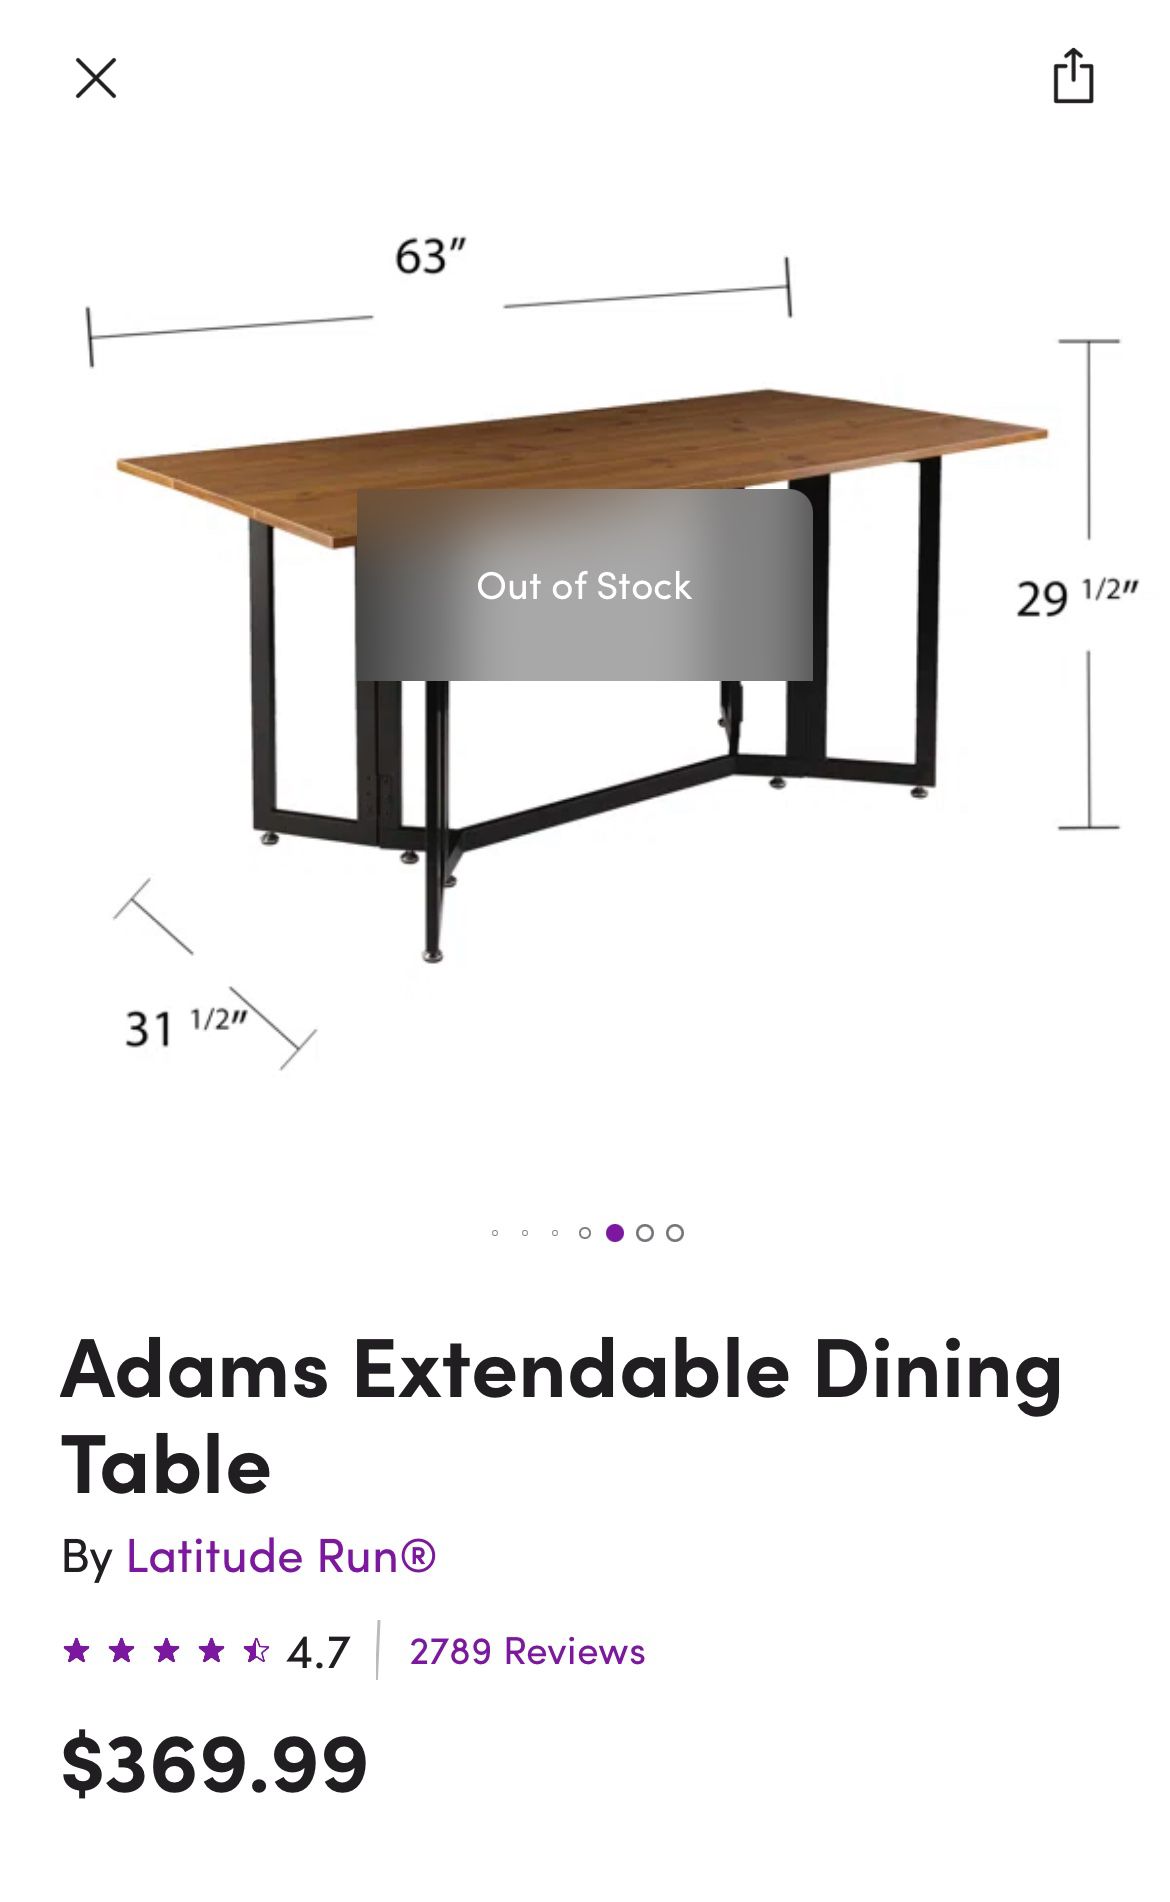 PRICE REDUCED -Adams Extendable Dining Table 